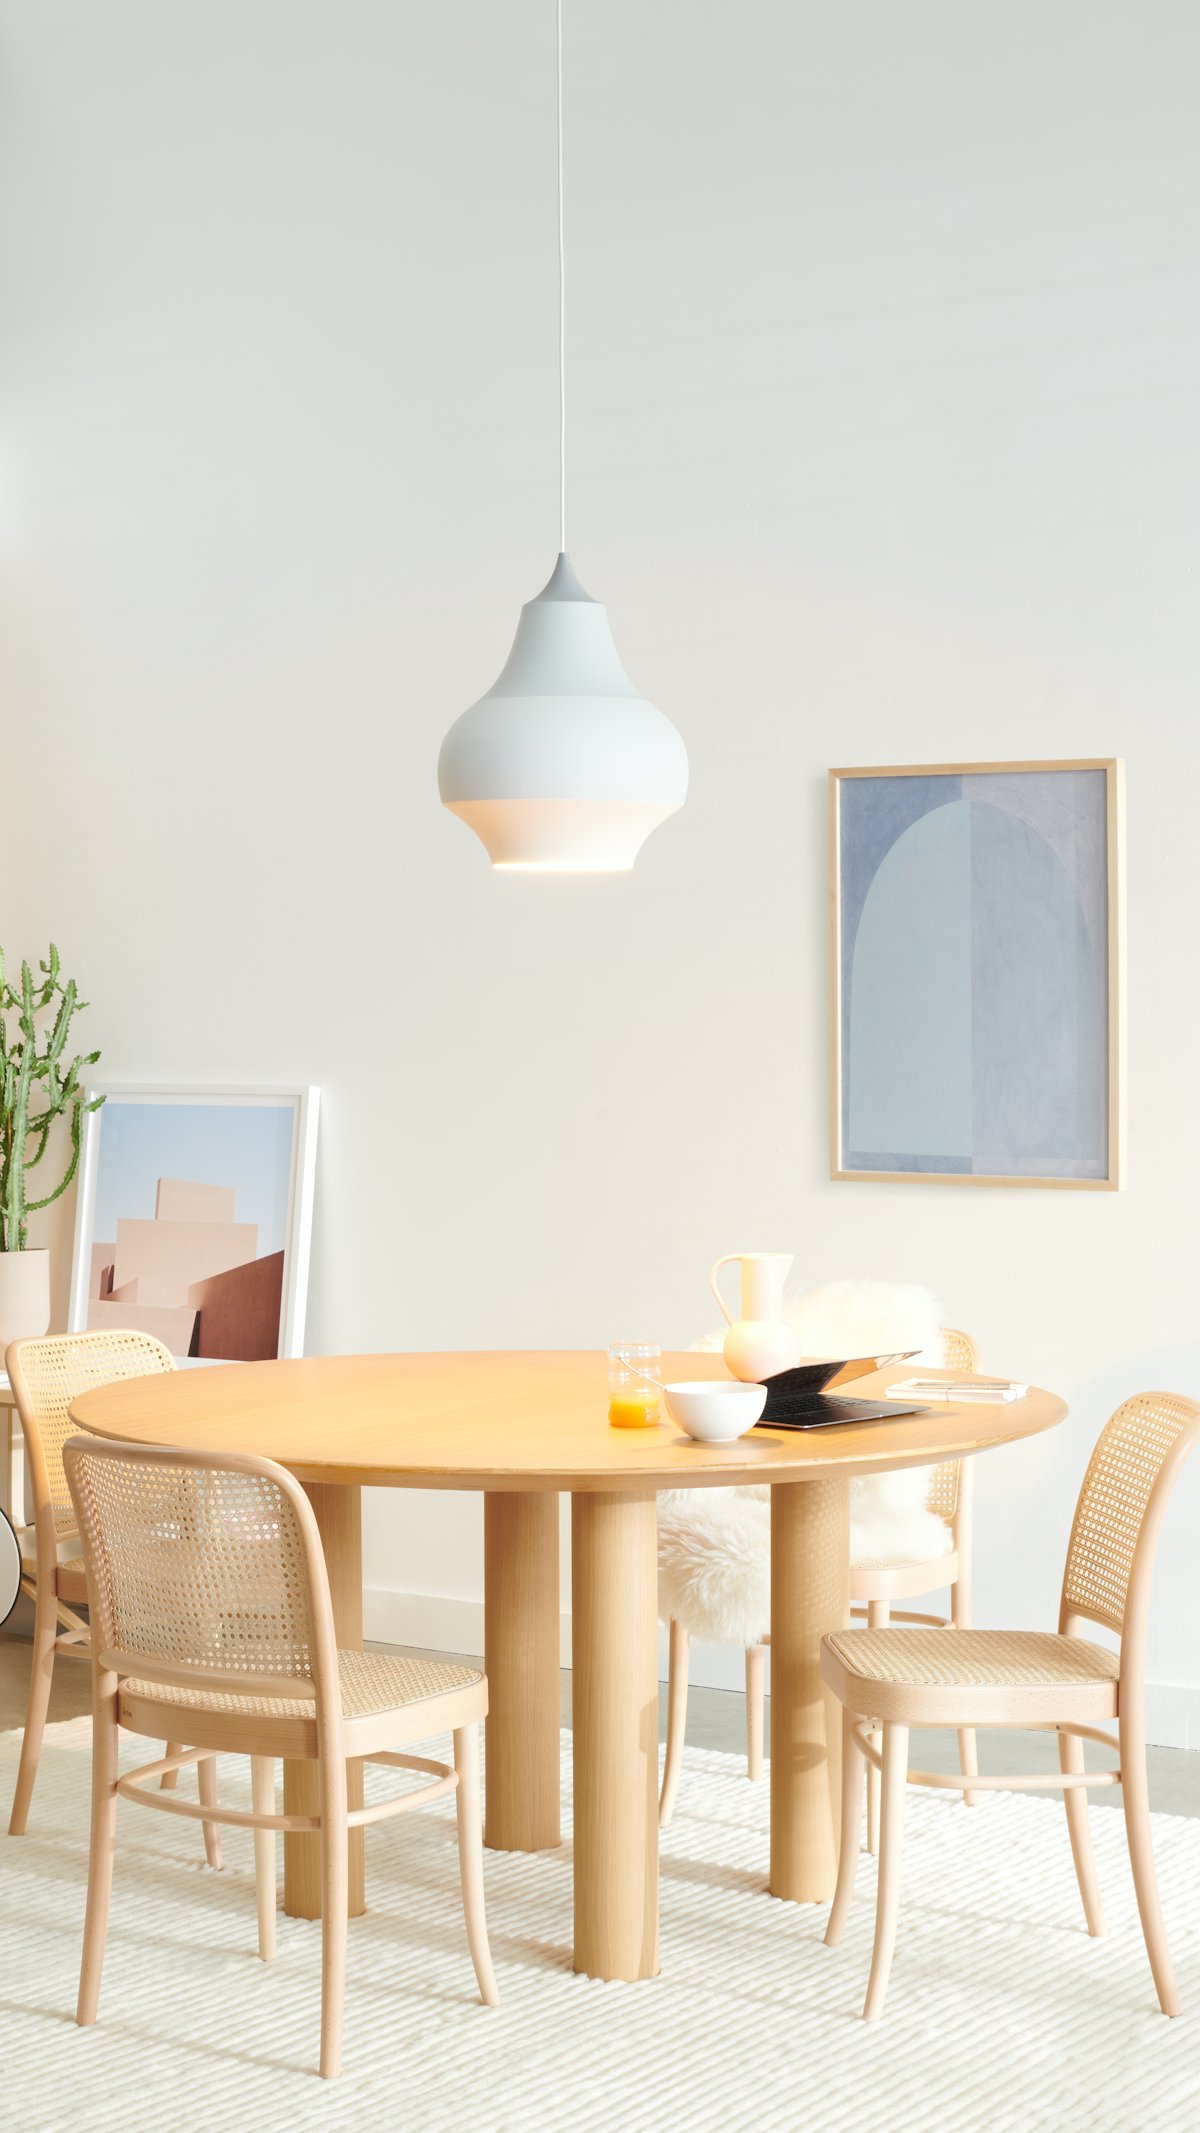 Earth Table, Hoffman Dining Chairs and Cirque Pendant